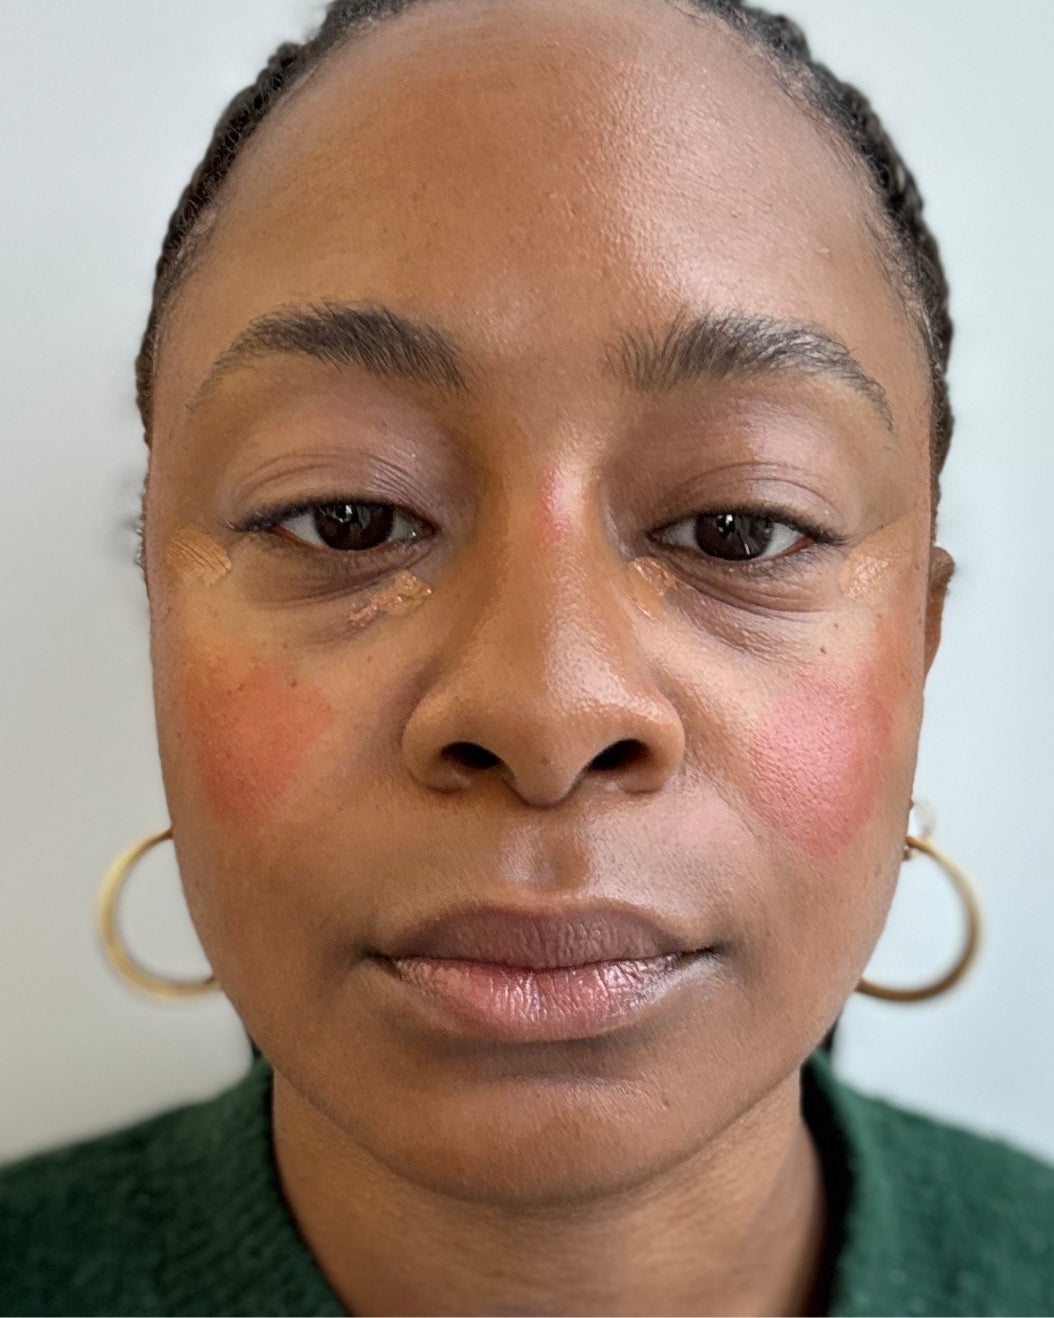 Woman with ombre blush and under eye concealer before it's blended on a white background